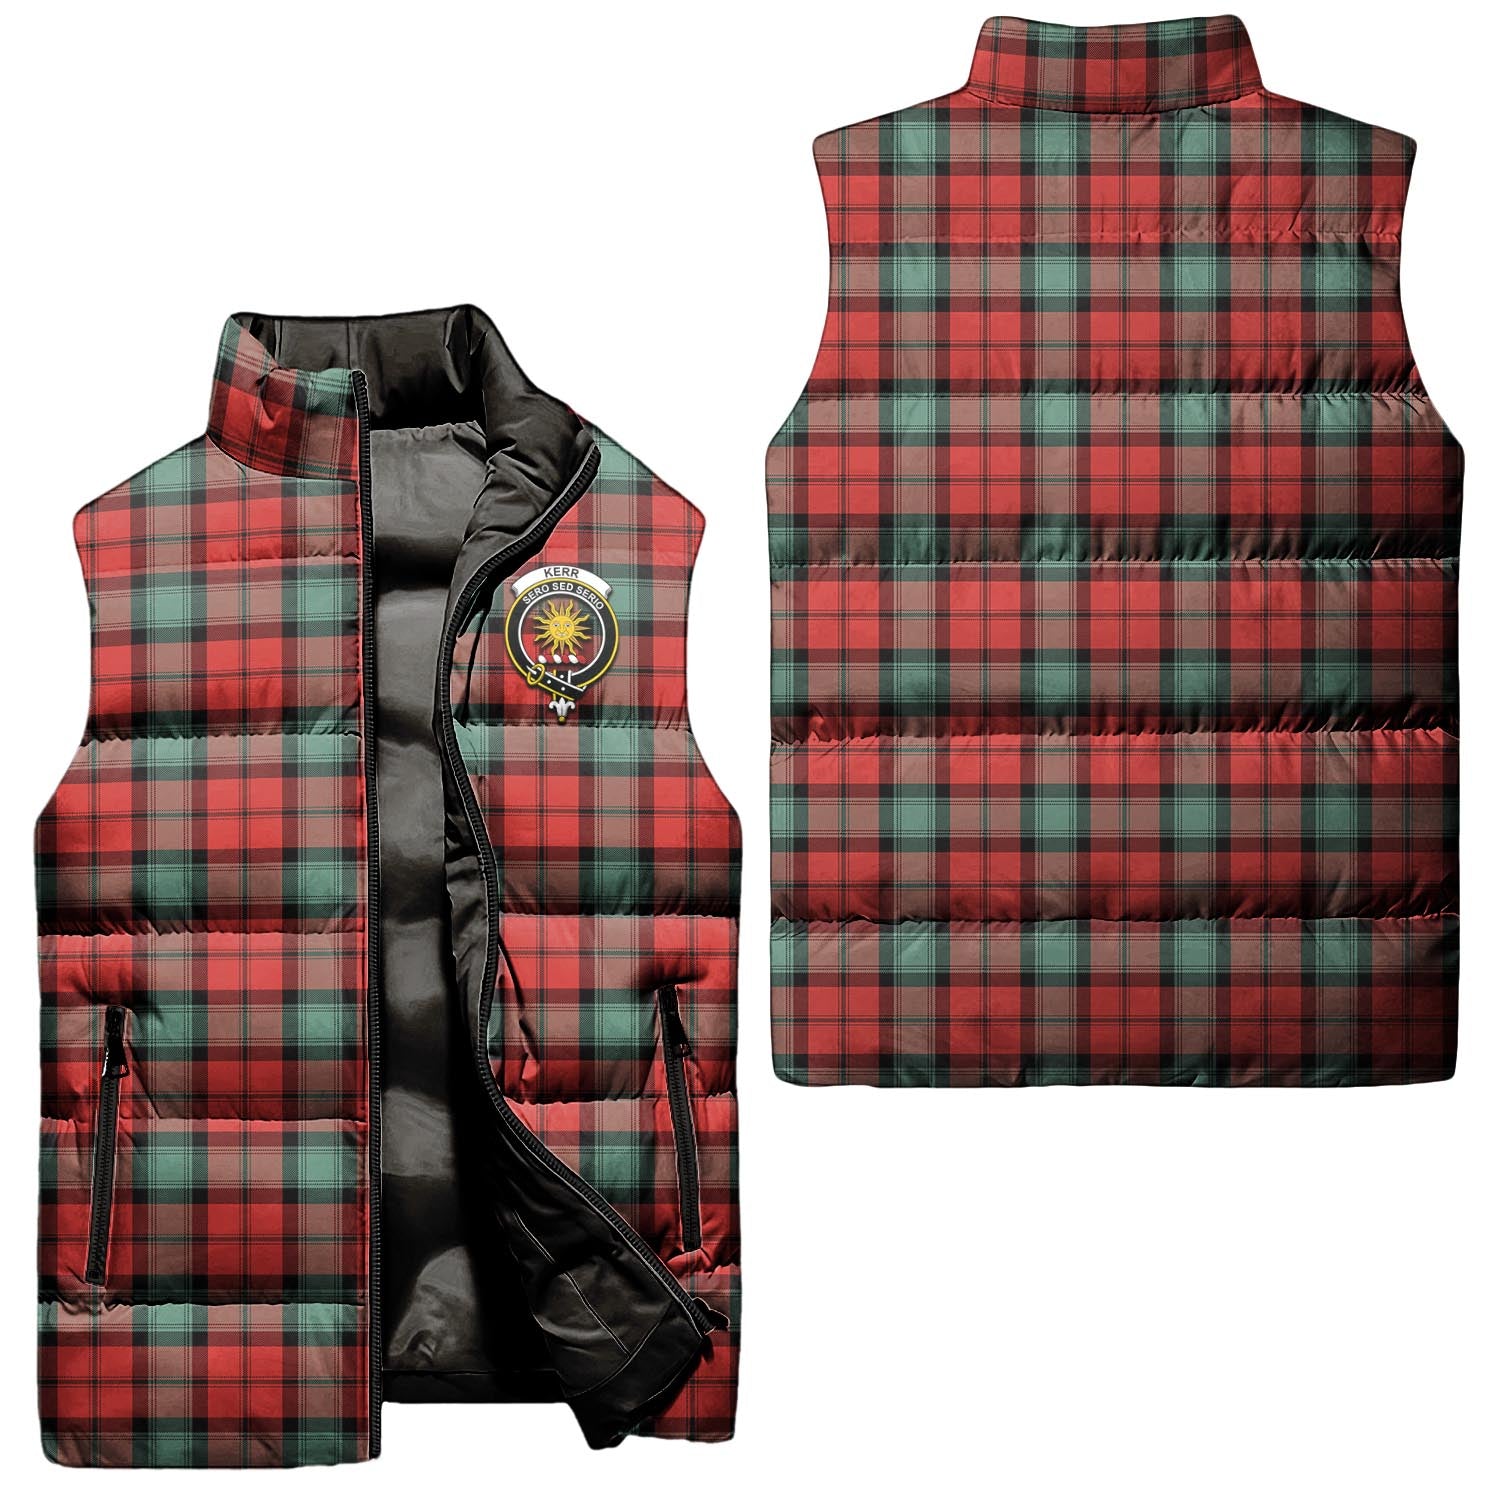 kerr-ancient-clan-puffer-vest-family-crest-plaid-sleeveless-down-jacket